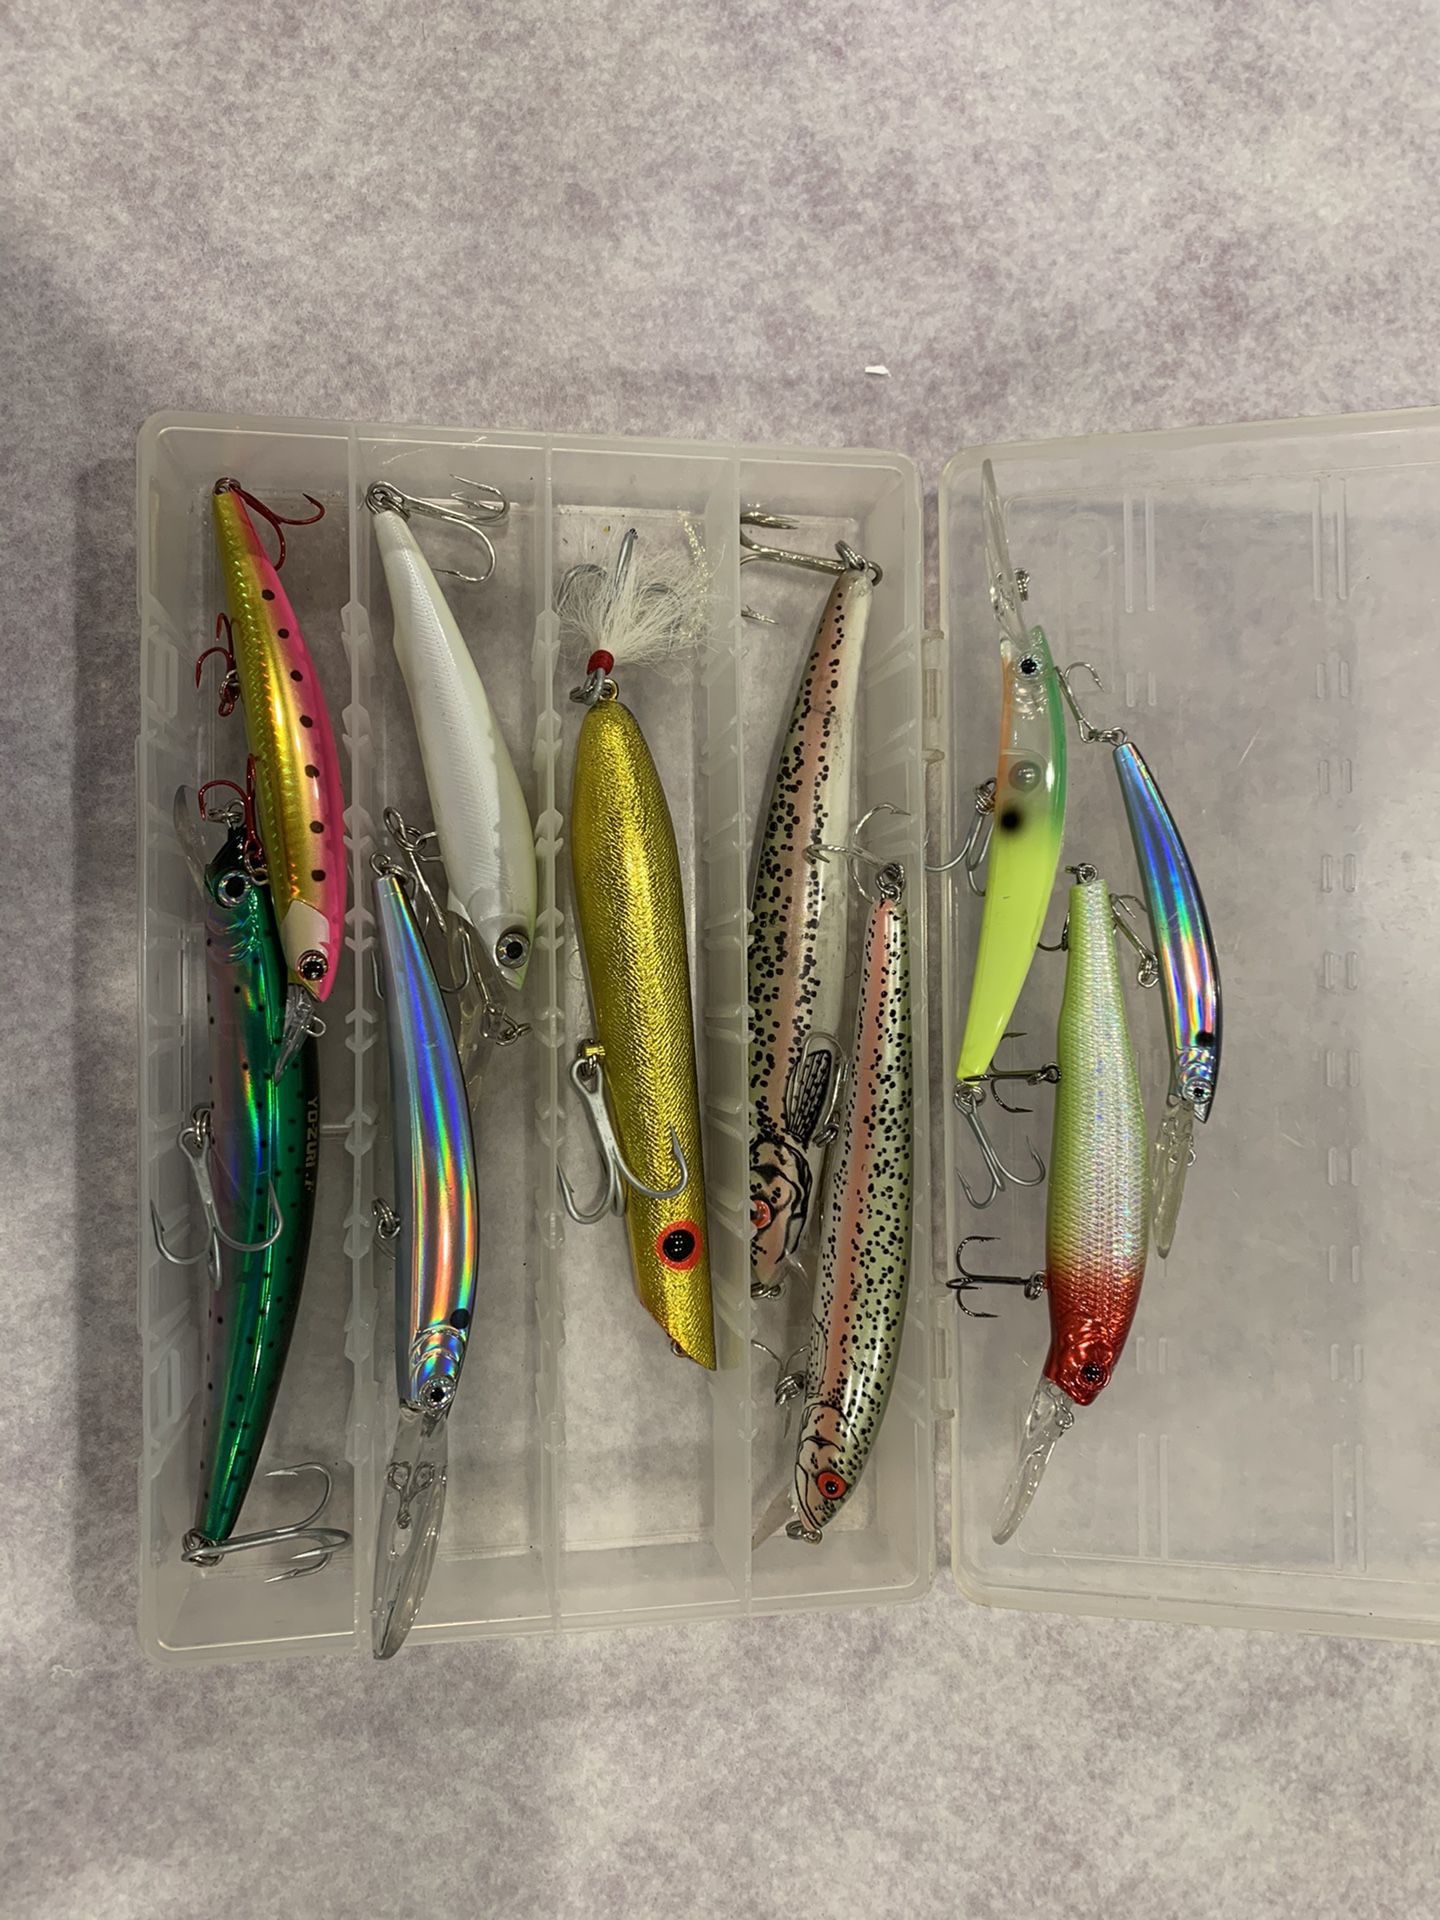 Lot of 10 large fishing lures fore fresh or saltwater.